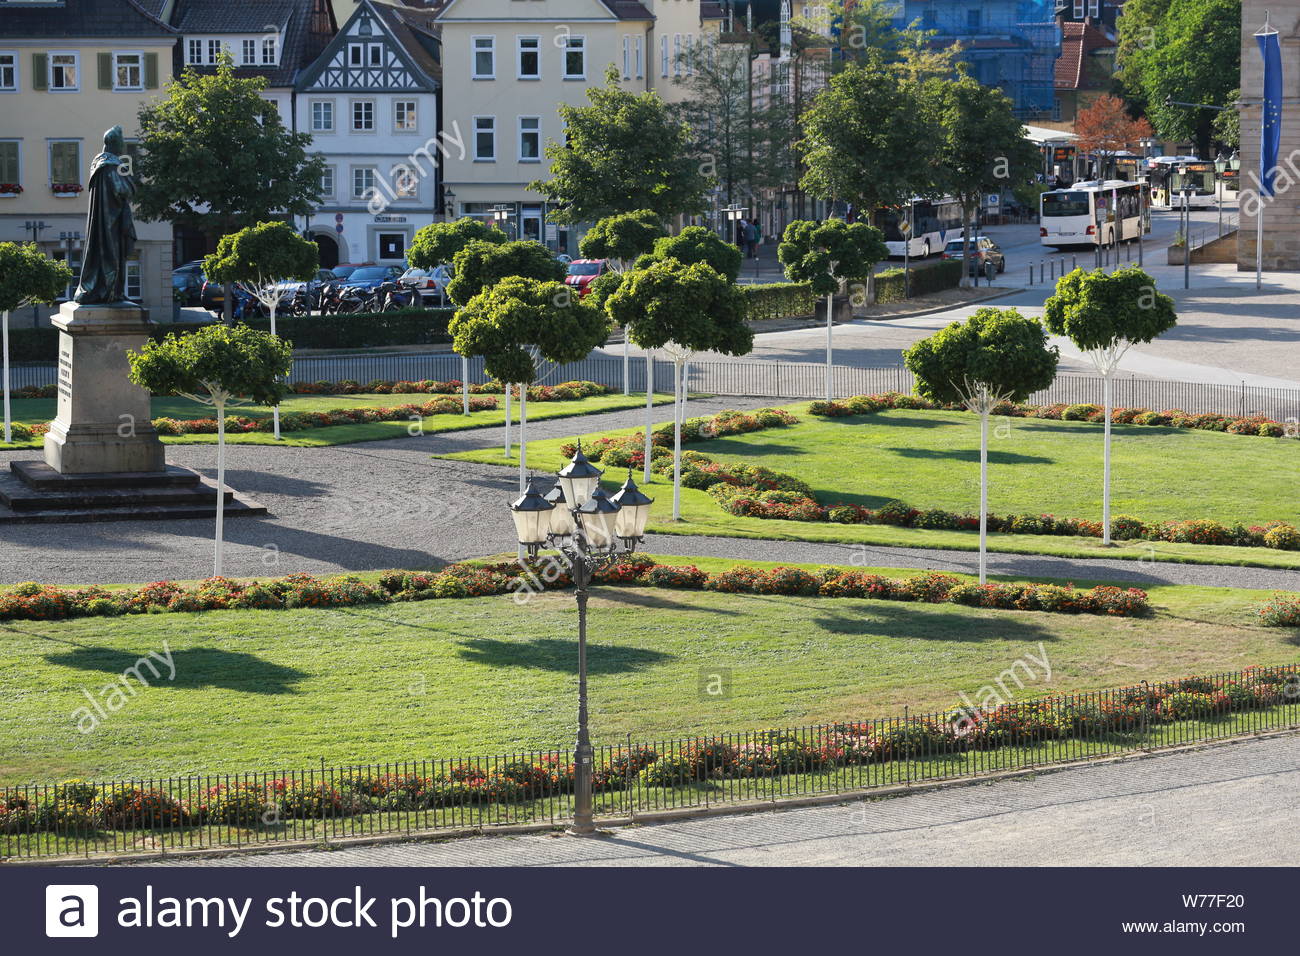 A sunny day in the town centre of  Coburg in Bavaria, Germany Stock Photo